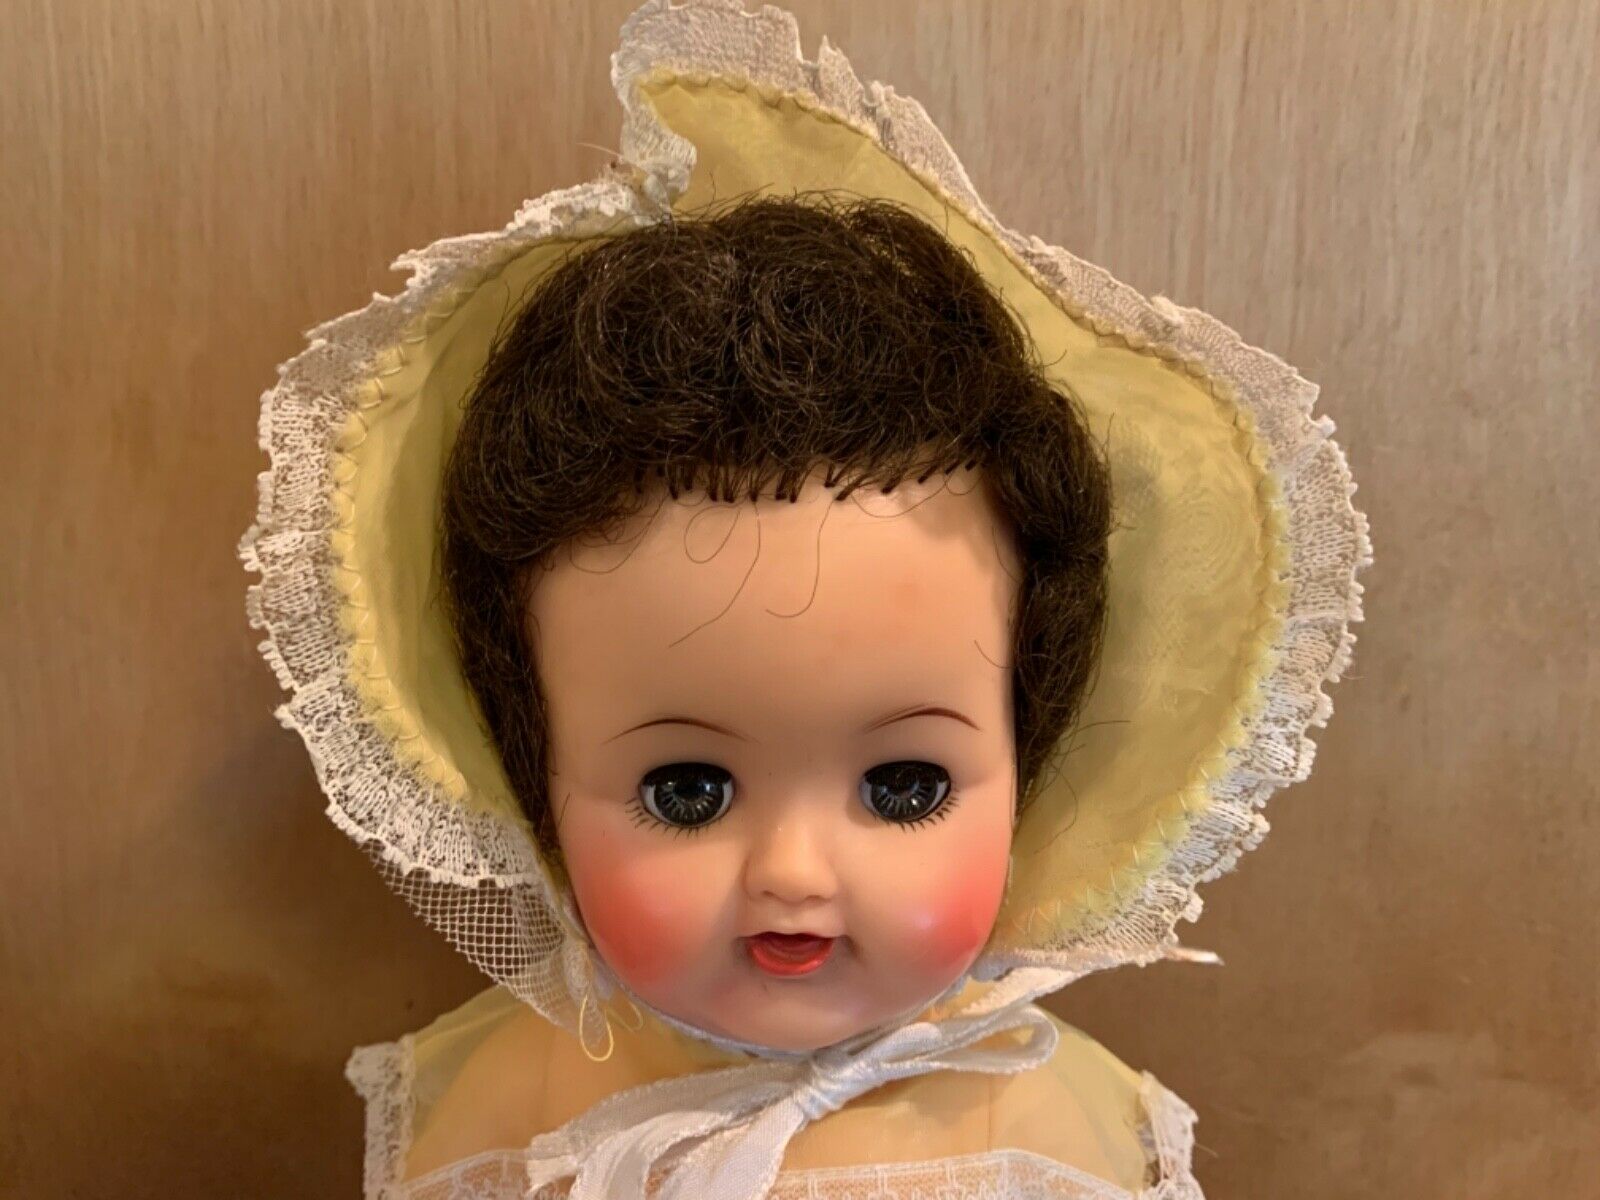 1960 Ideal Toy Co. Vw-1 12" Betsy Wetsy Baby Doll